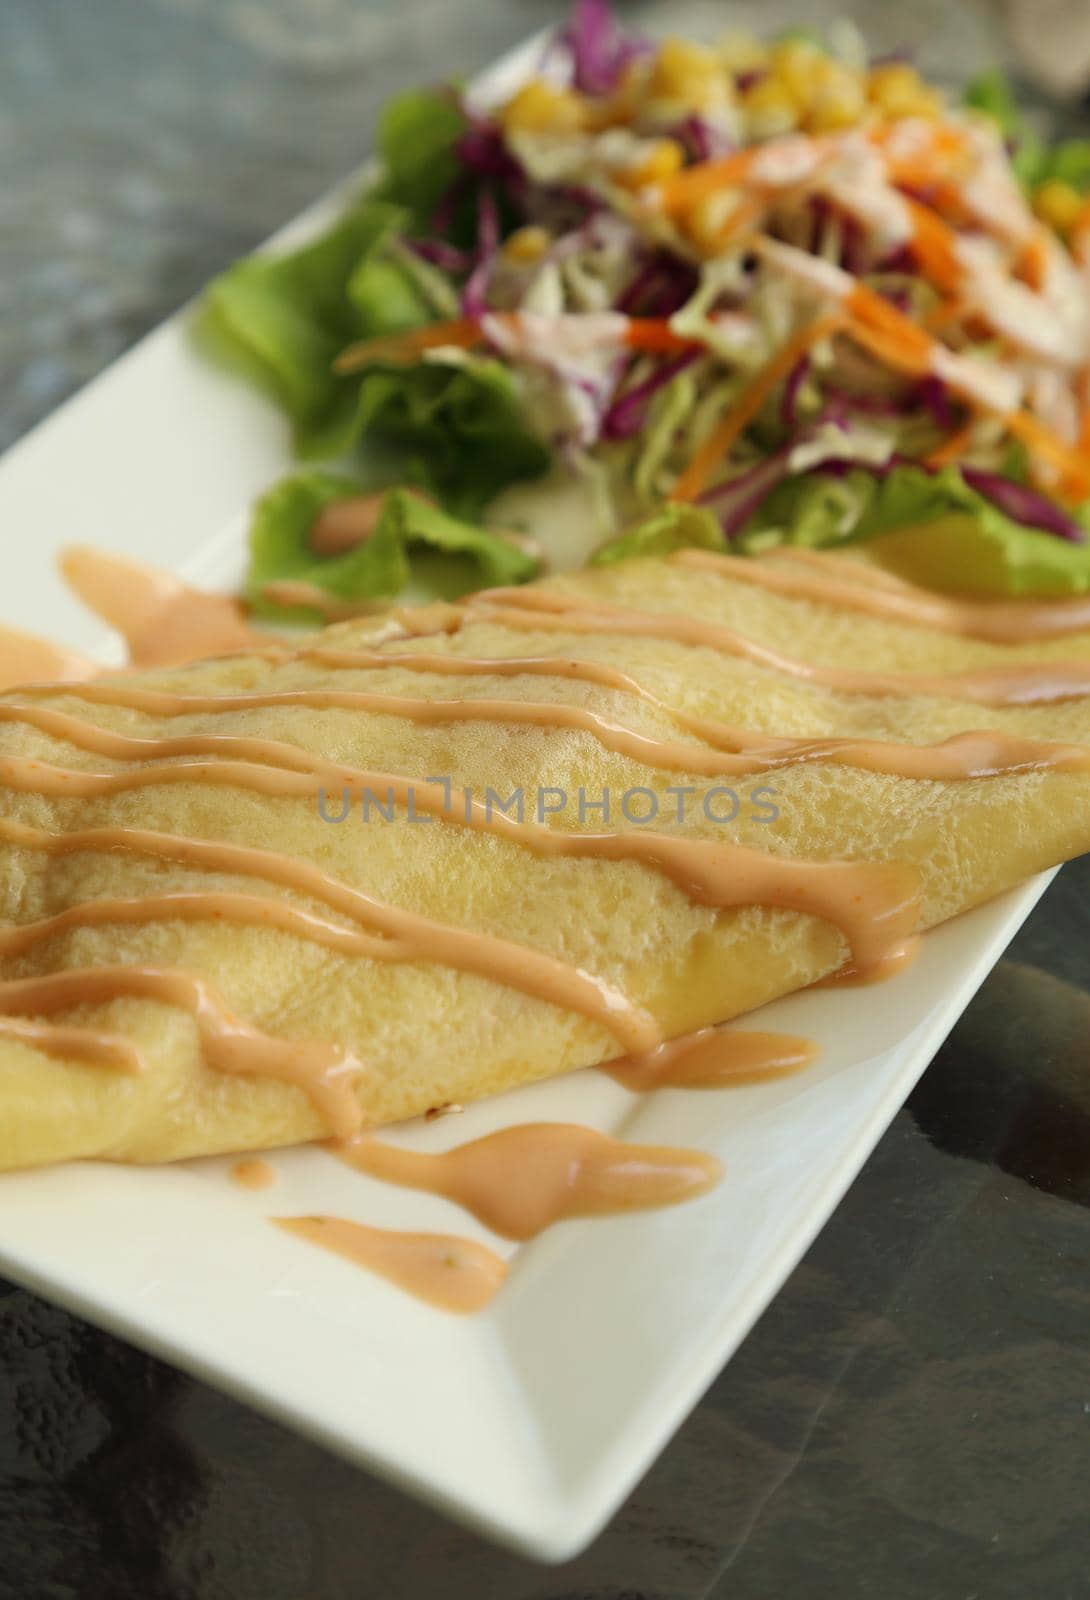 Crepe Cake with salad in cafe